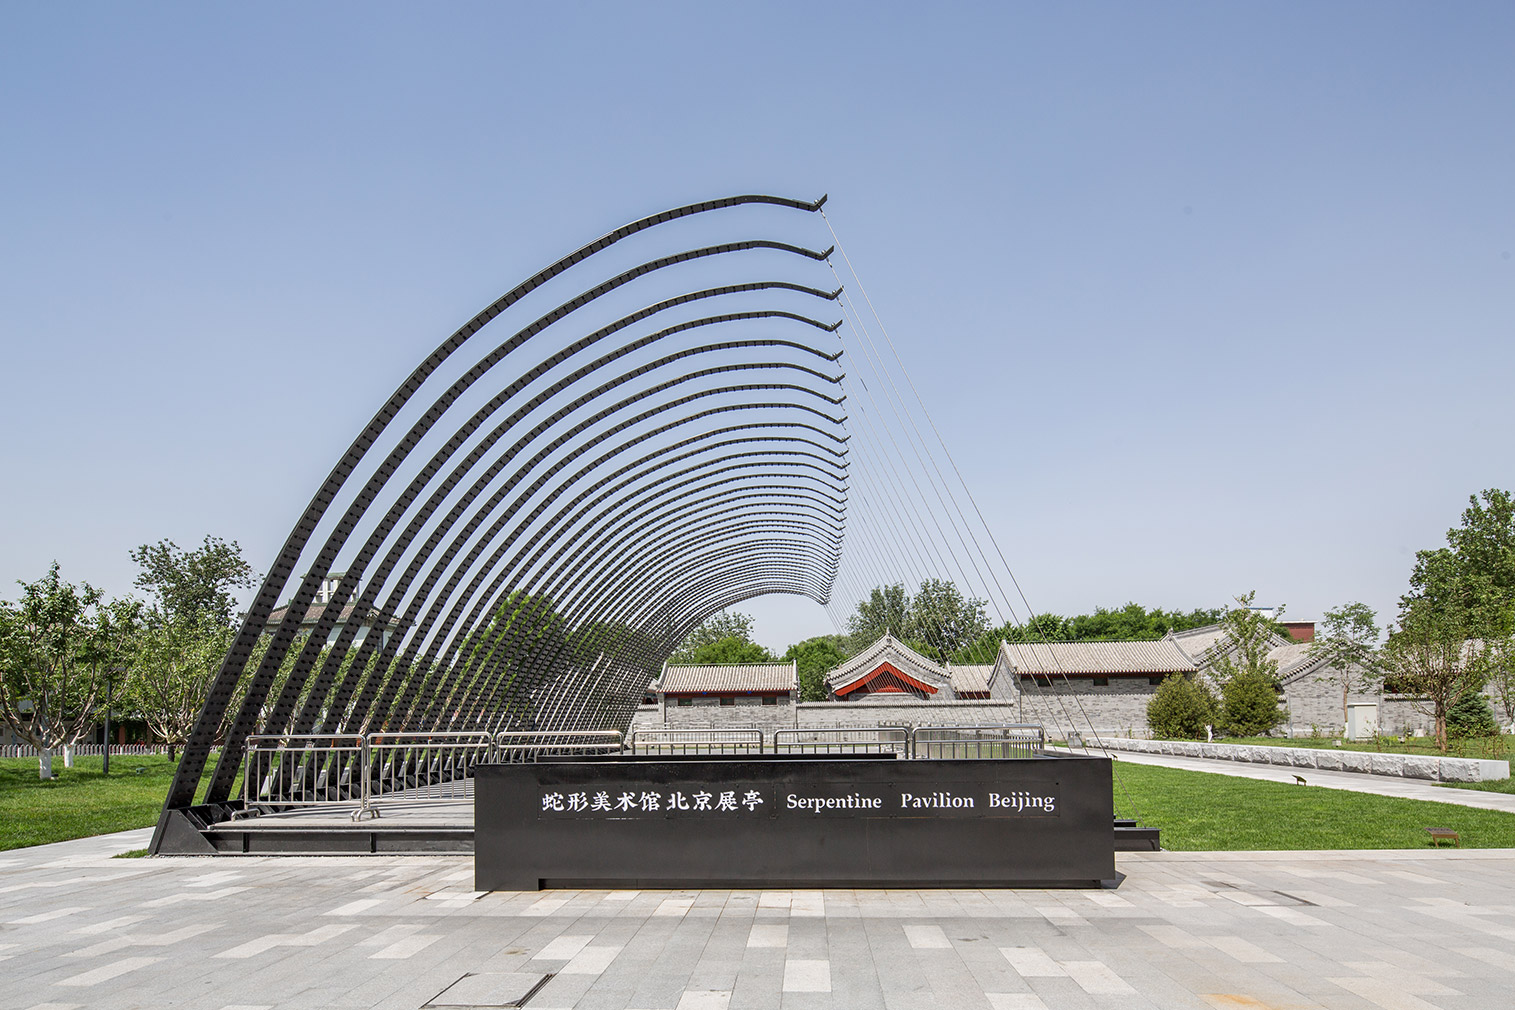 Serpentine Pavilion Beijing 2018 designed by JIAKUN Architects, WF Central, Beijing (30 May – 31 October 2018) WF CENTRAL © 2018